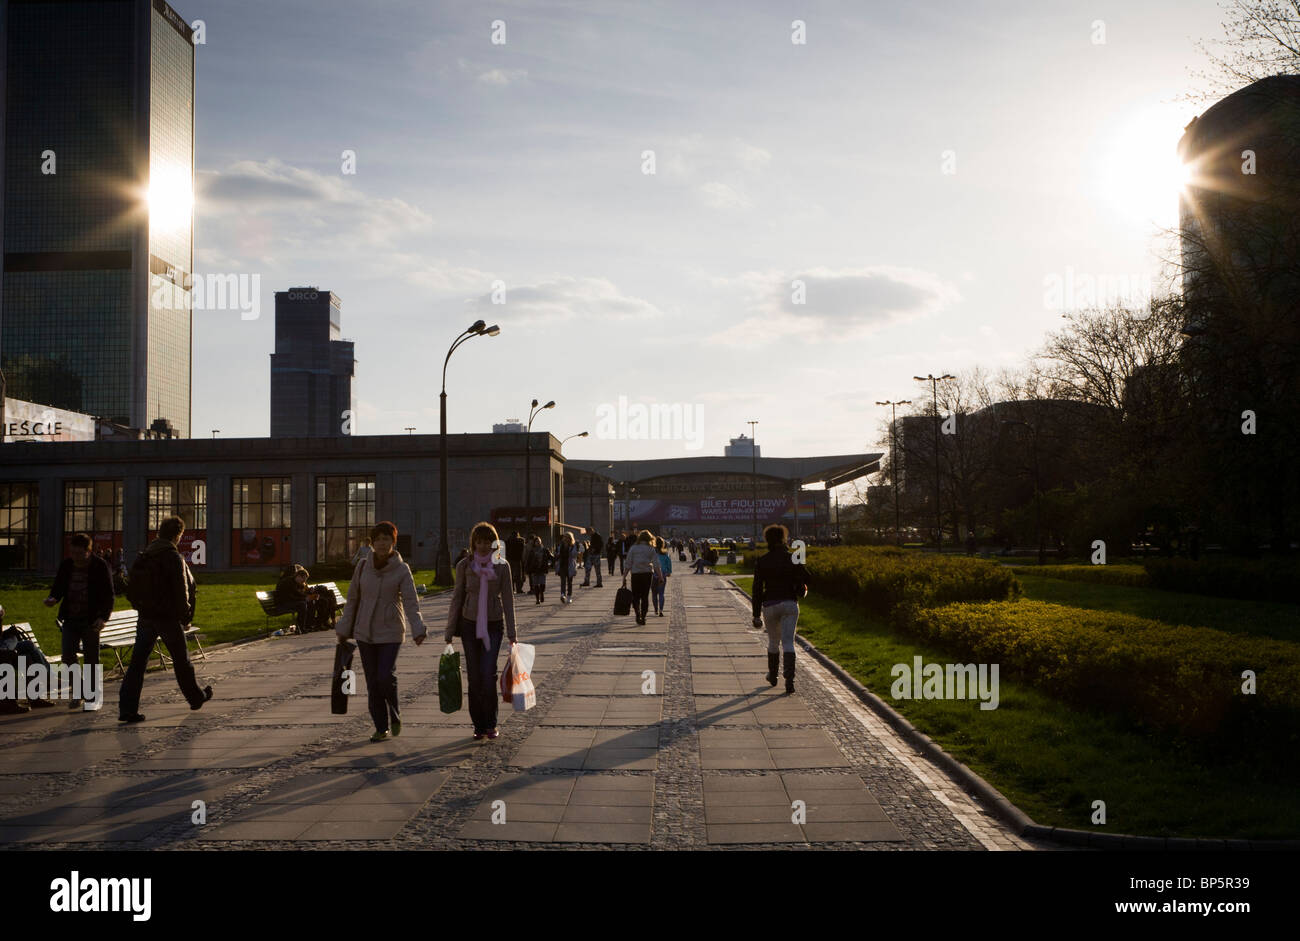 People walking on Parade Square (Plac Defilad), next to The Palace of Culture and Science, Warsaw Poland Stock Photo